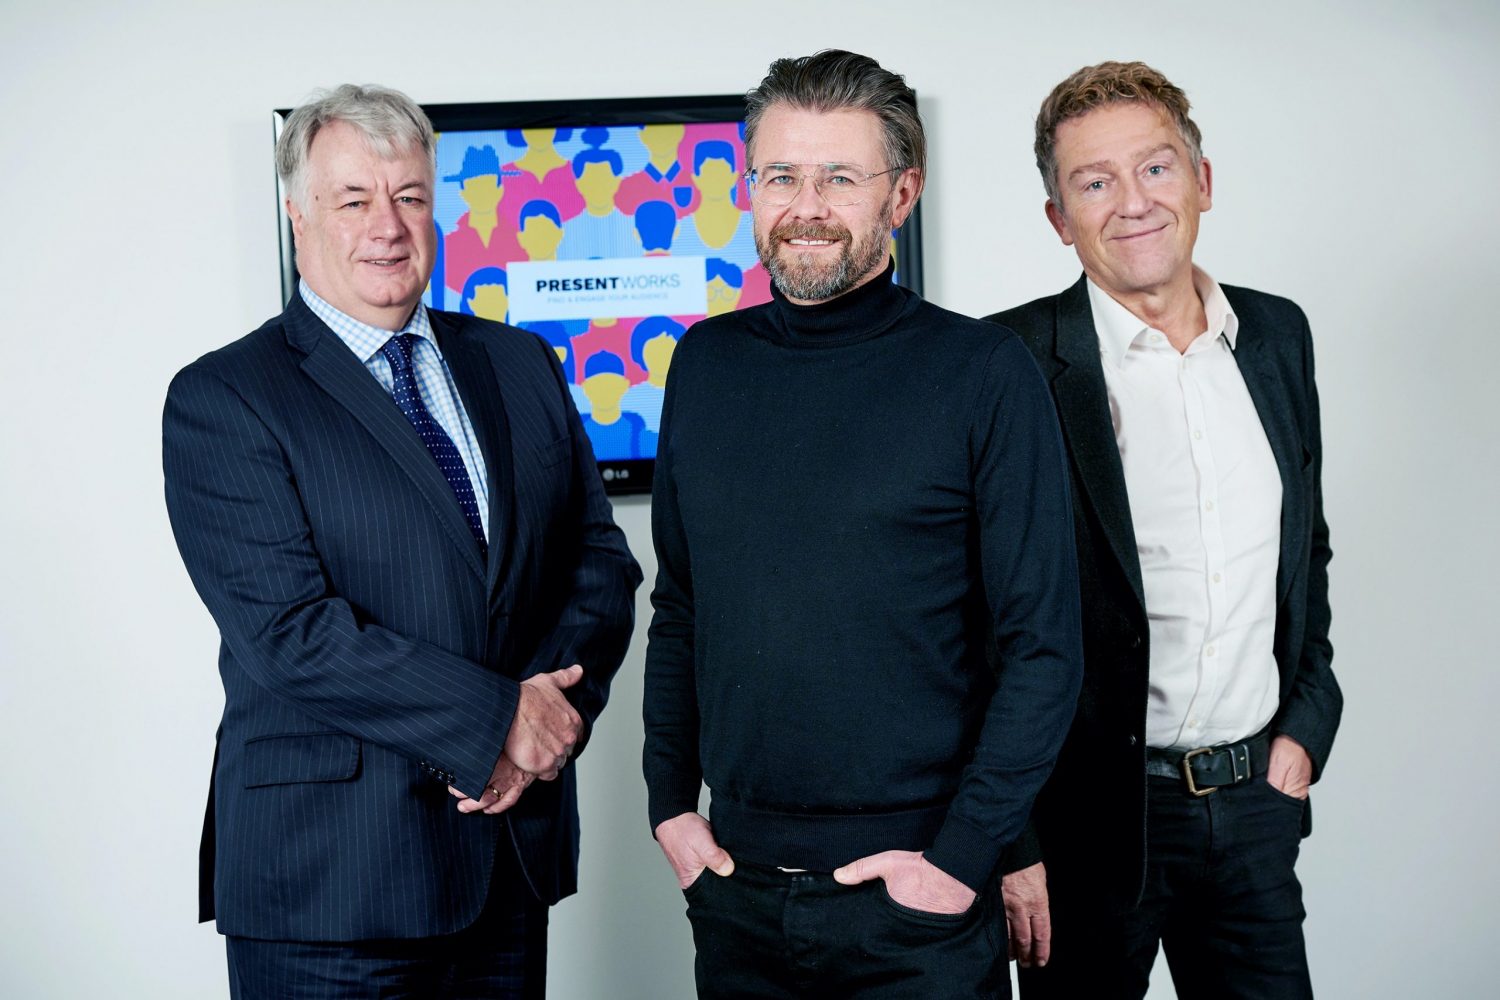 Three men standing in front of screen showing Present Works on the screen. Man to the far left is wearing a black suit with a white shirt, man in the middle has a beard and is wearing a black jumper and black trousers and man at the far left has grey hair and is wearing a blue suit, a checked shirt and blue tie.